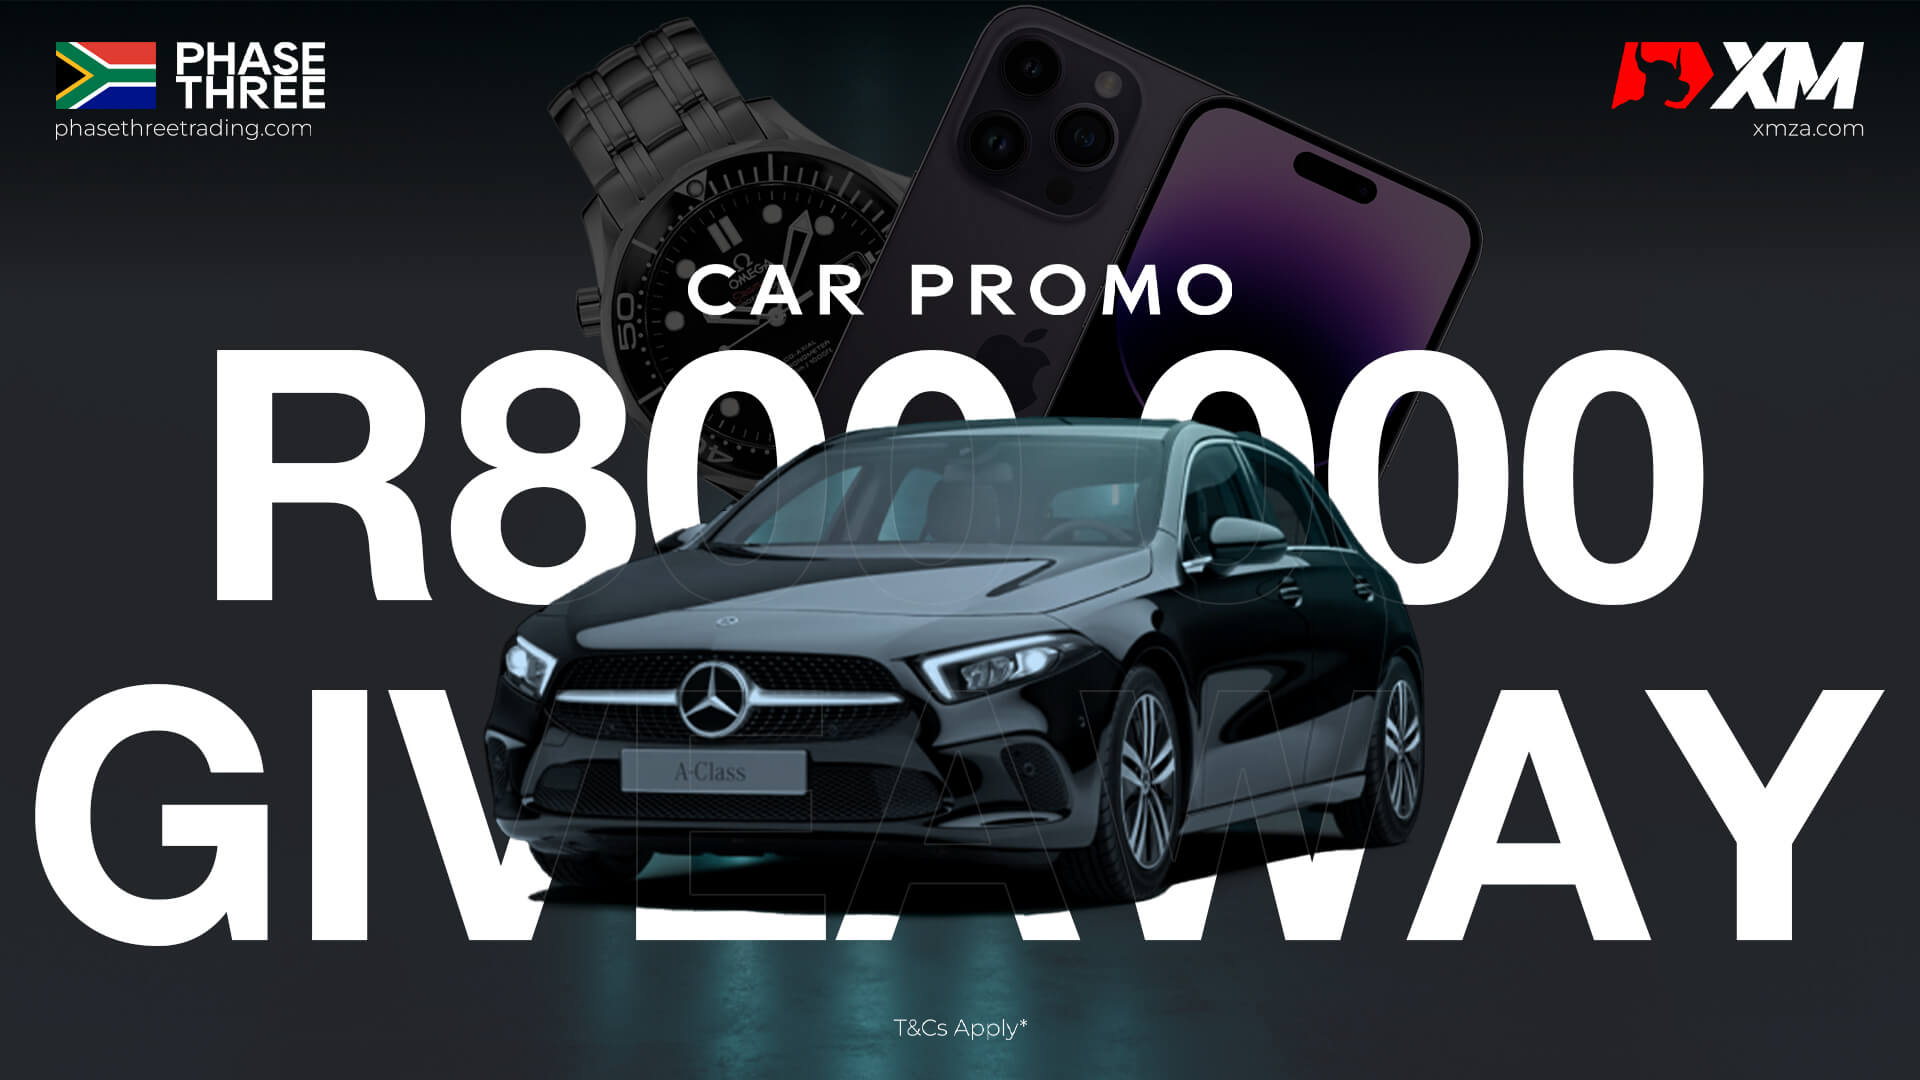 XM Global March R800 000 South African Car Promo - Sign Up Now!